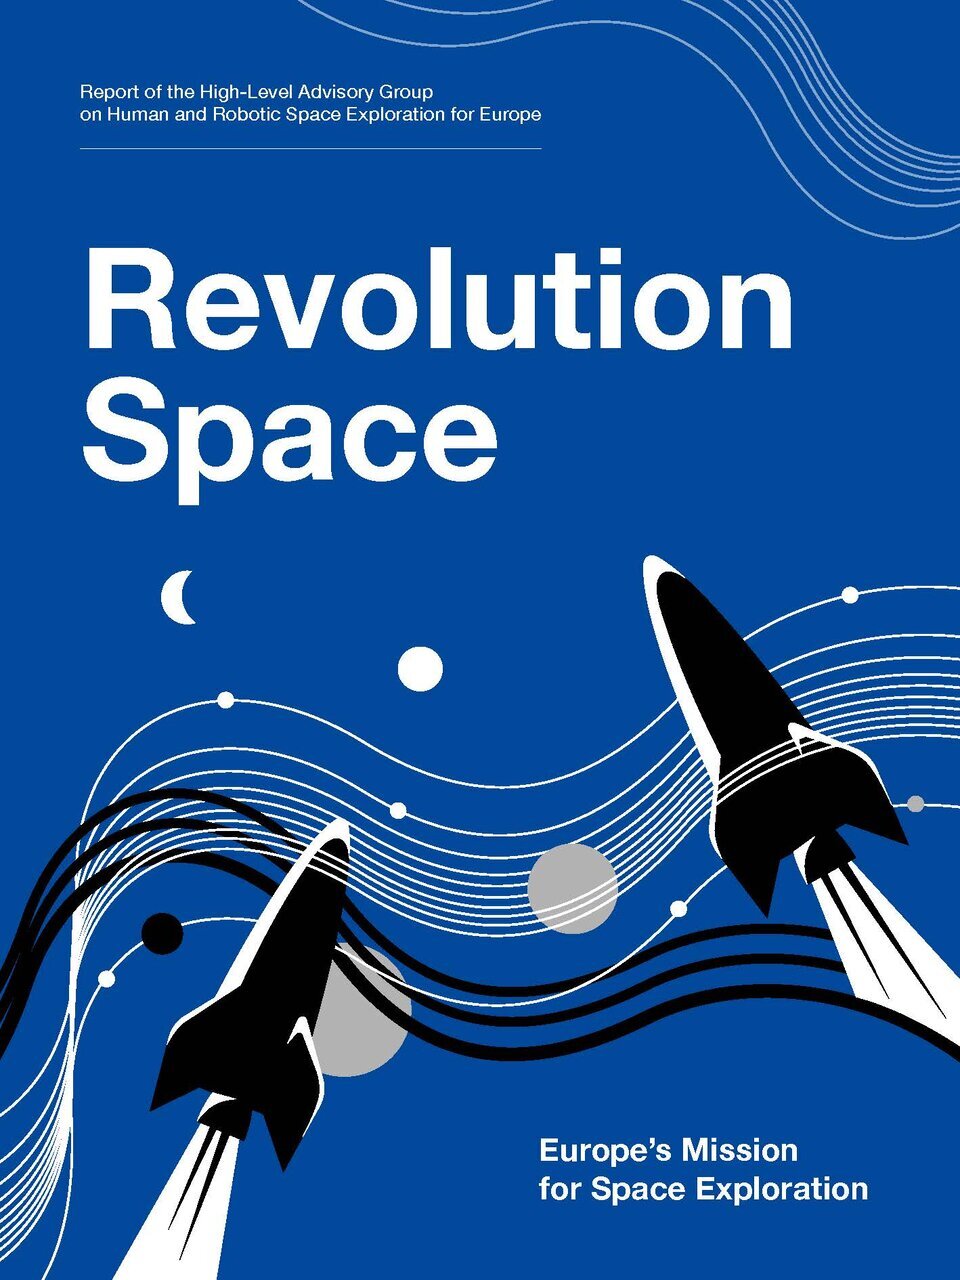 revolution-space-europe-s-mission-for-space-exploration-article